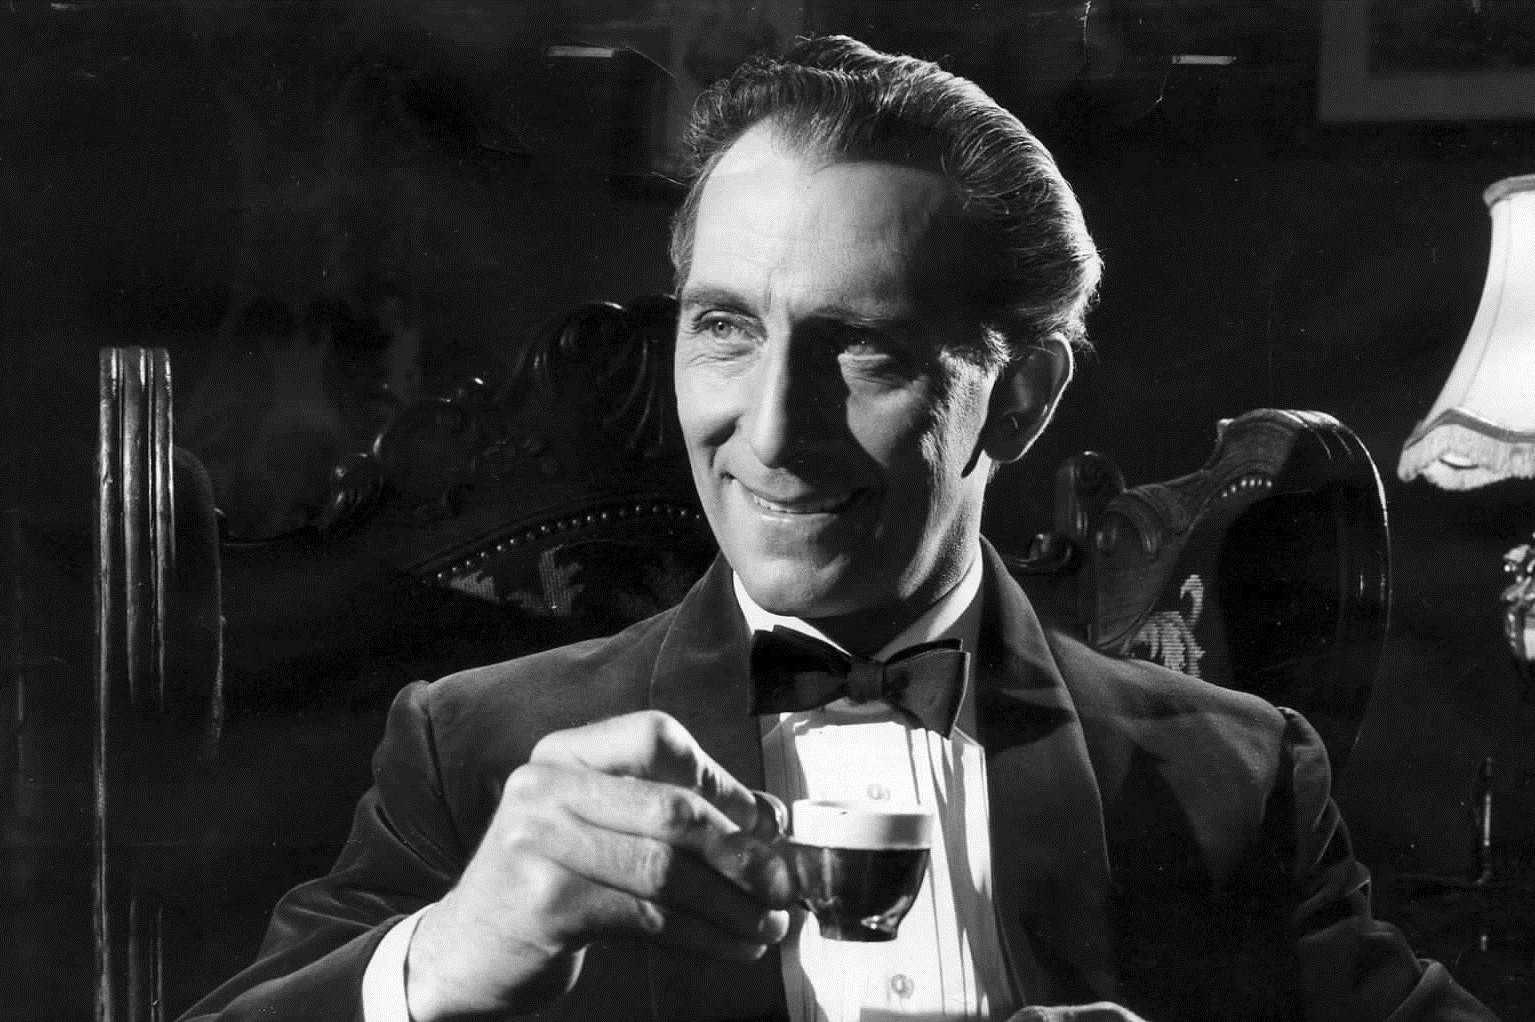 Actor Peter Cushing was famous for his starring roles in British horror films